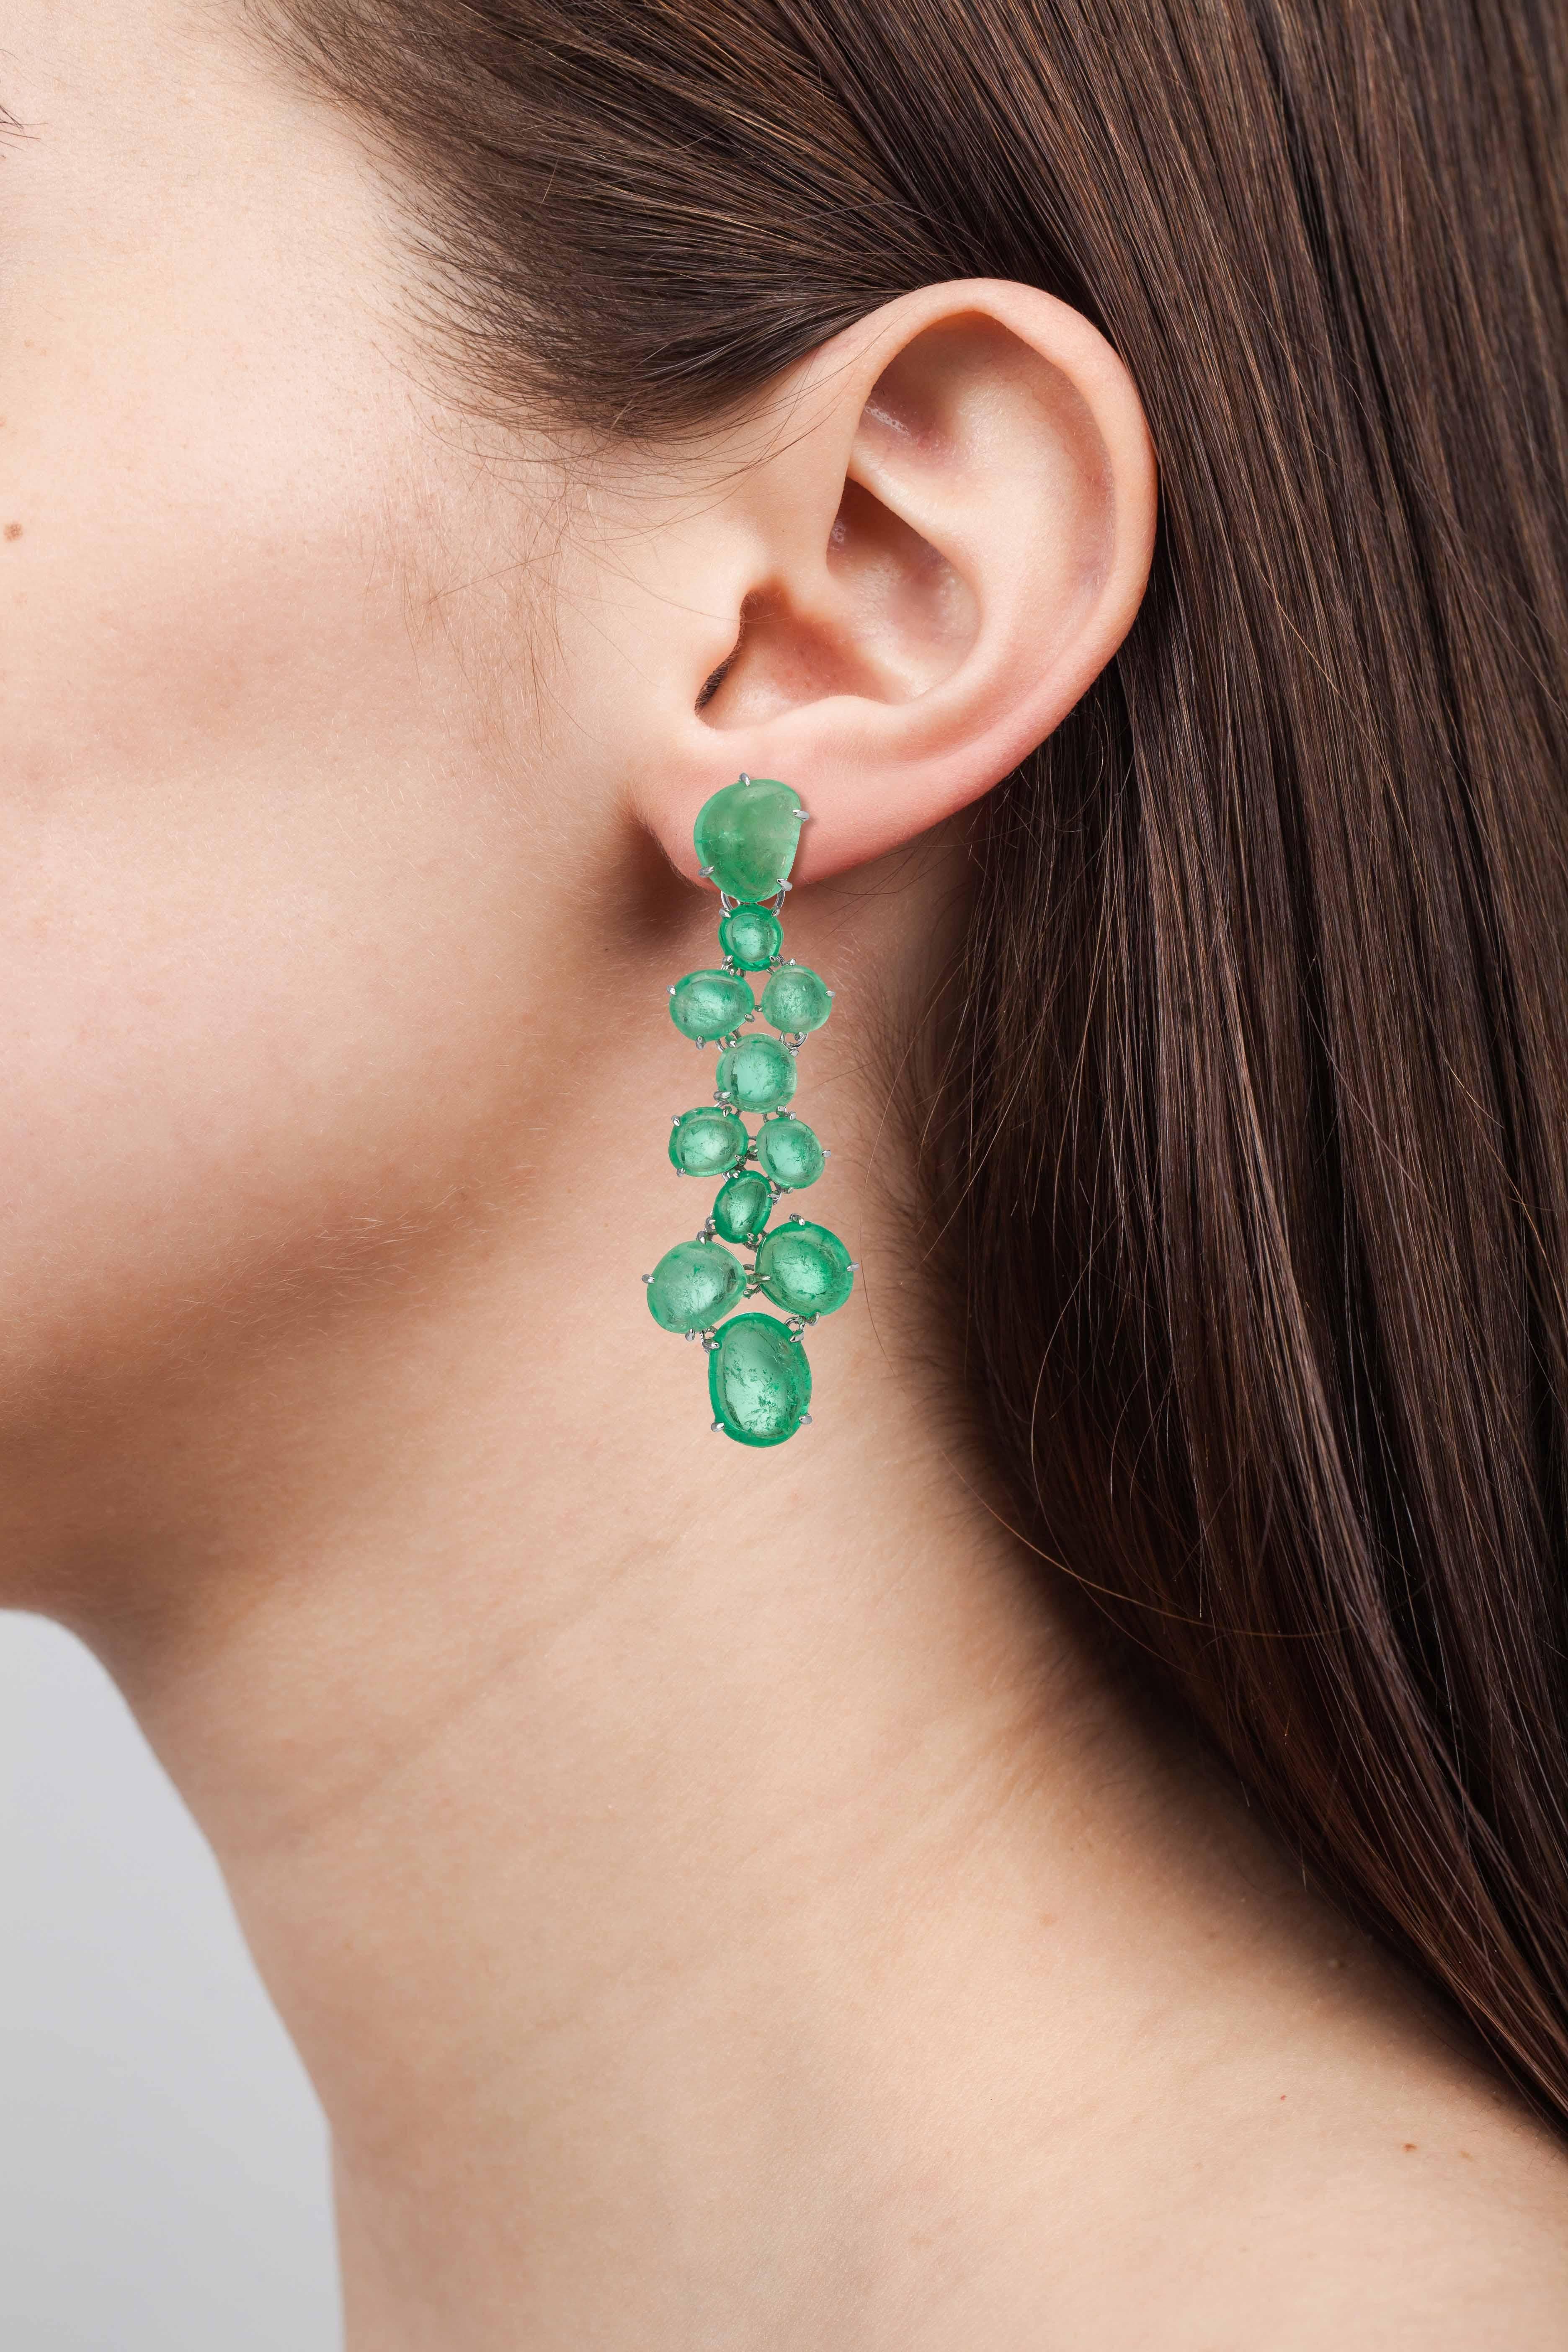 18 Karat white gold Chandelier earrings set with Muzo Colombian emeralds weighing 55.54 carats.

Muzo Emerald Colombia Heritage Muisca Earrings set with 55.54 carats Emerald.

Named in honor of the ancient indigenous people of the Muzo region of